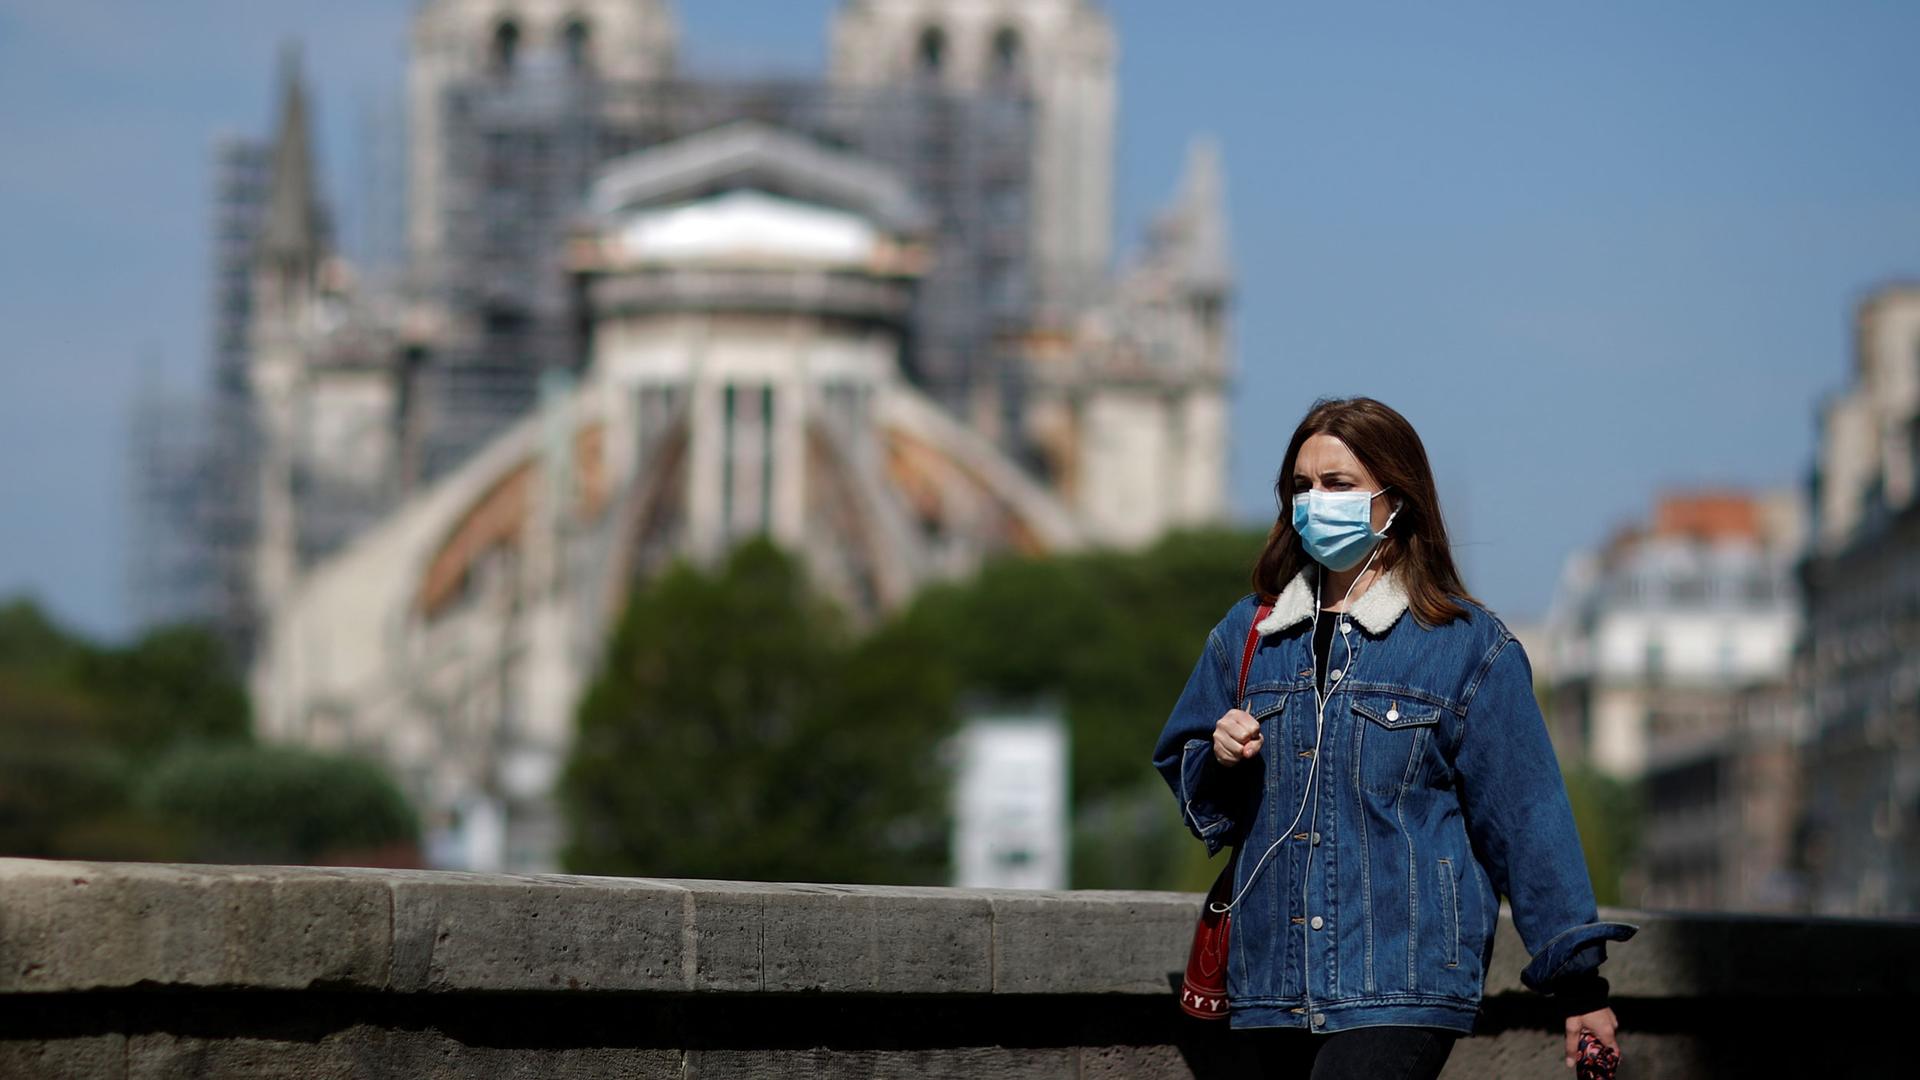 A woman, wearing a protective face mask and a jean jacket is shown walking past Notre-Dame Cathedral in the background in soft focus.